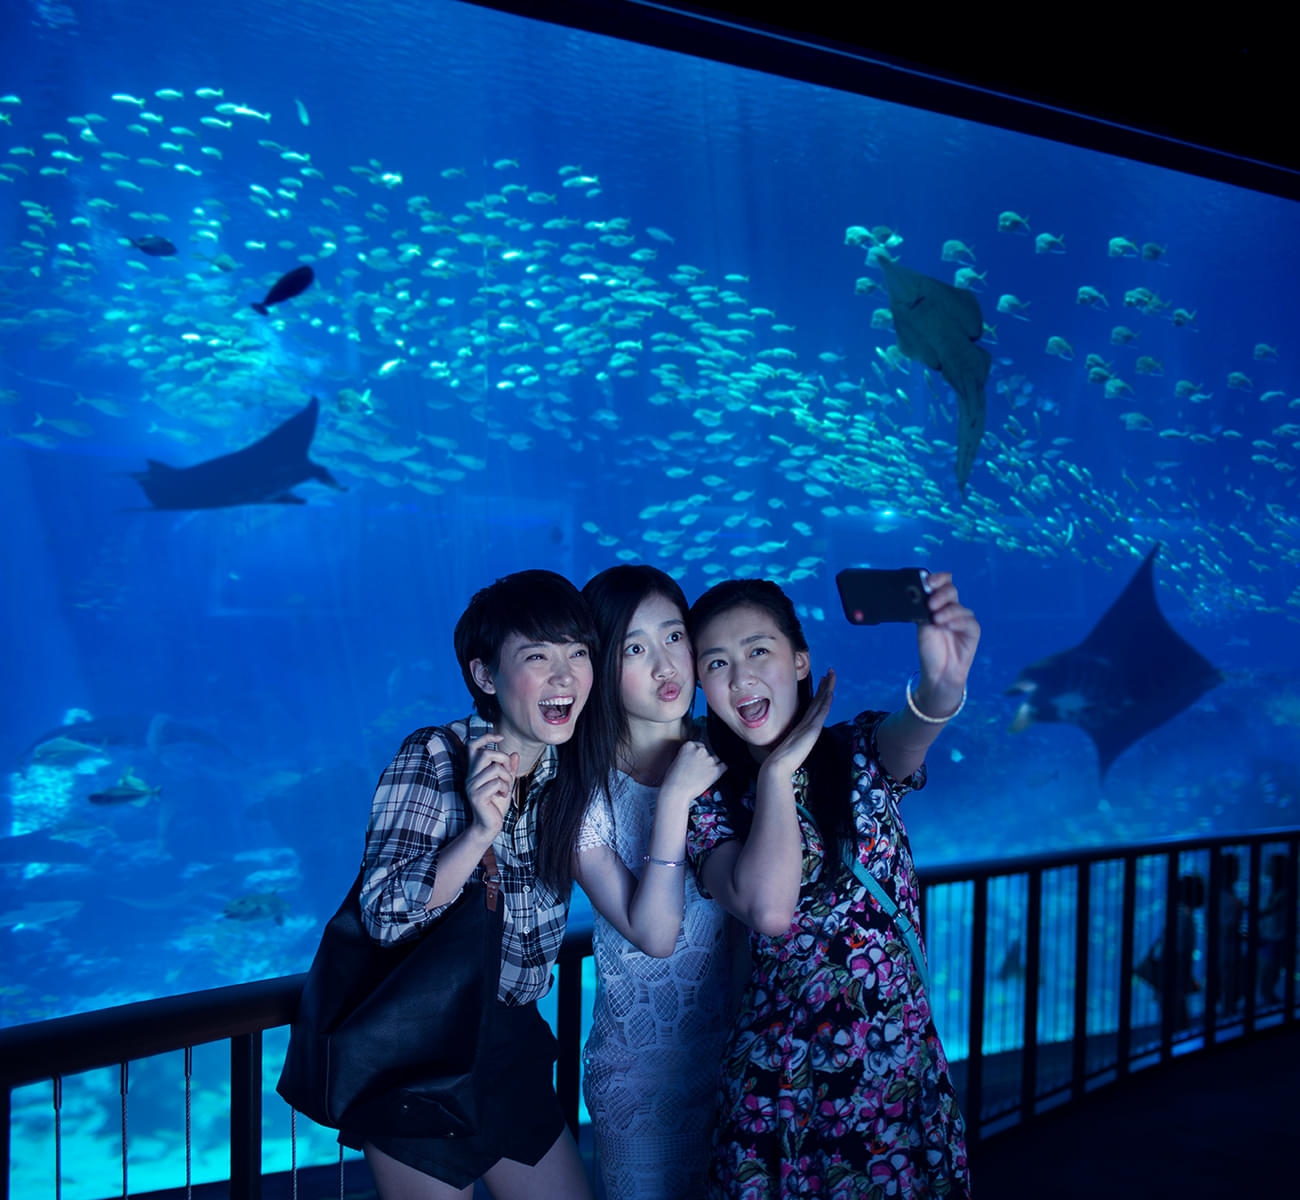 Click amazing pictures and spend wonderful time with your folks in the aquarium